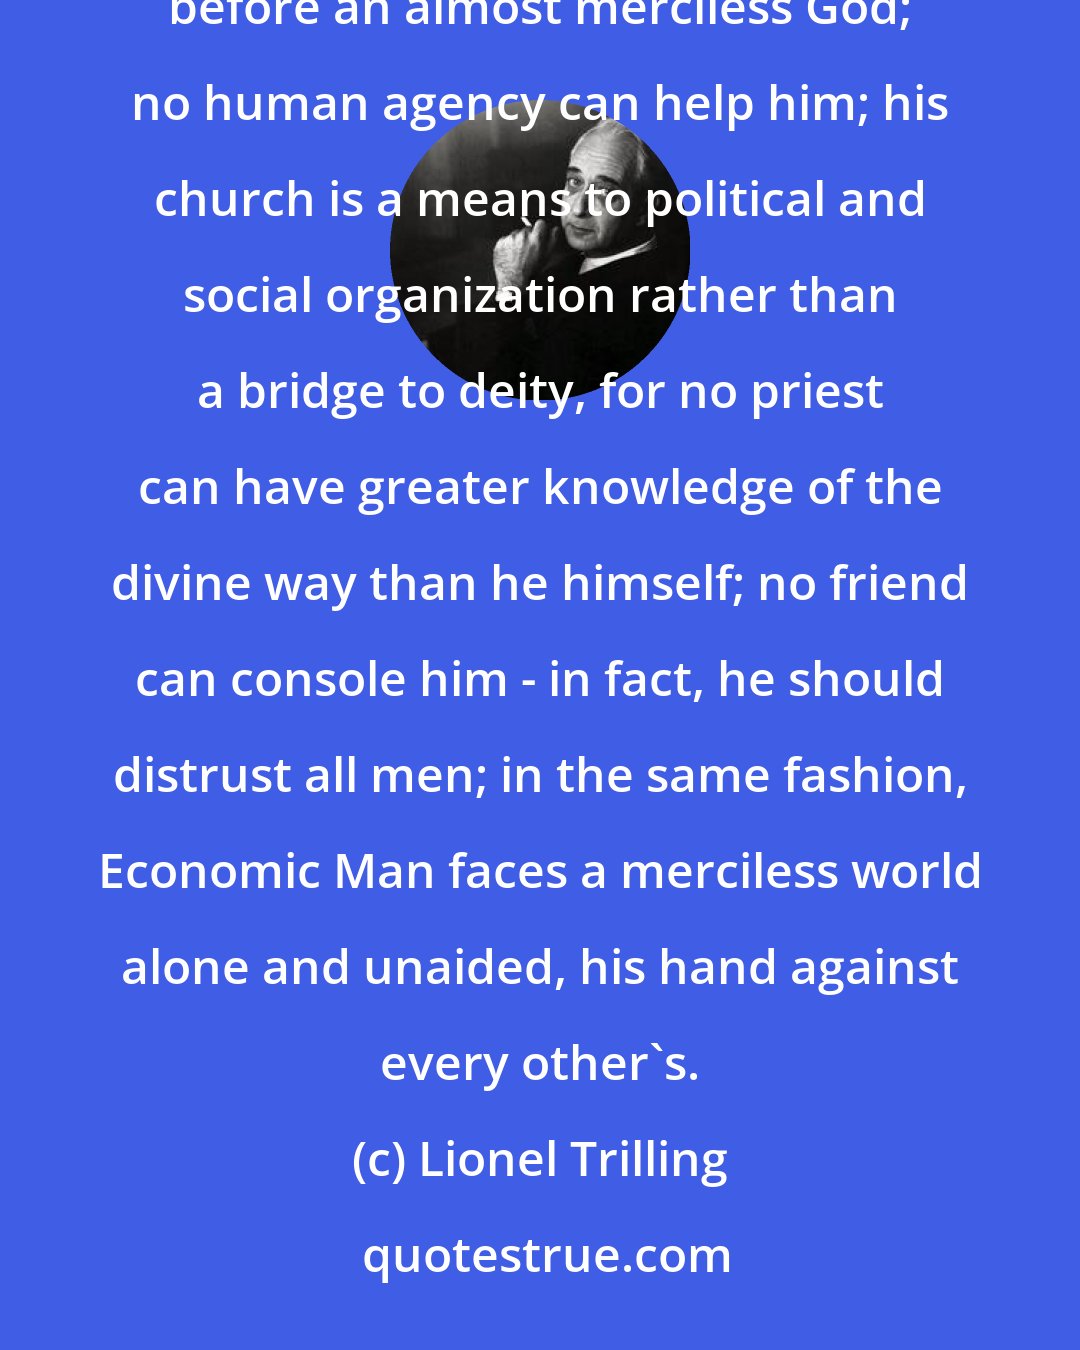 Lionel Trilling: Economic man and the Calvinist Christian sing to each other like voices in a fugue. The Calvinist stands alone before an almost merciless God; no human agency can help him; his church is a means to political and social organization rather than a bridge to deity, for no priest can have greater knowledge of the divine way than he himself; no friend can console him - in fact, he should distrust all men; in the same fashion, Economic Man faces a merciless world alone and unaided, his hand against every other's.